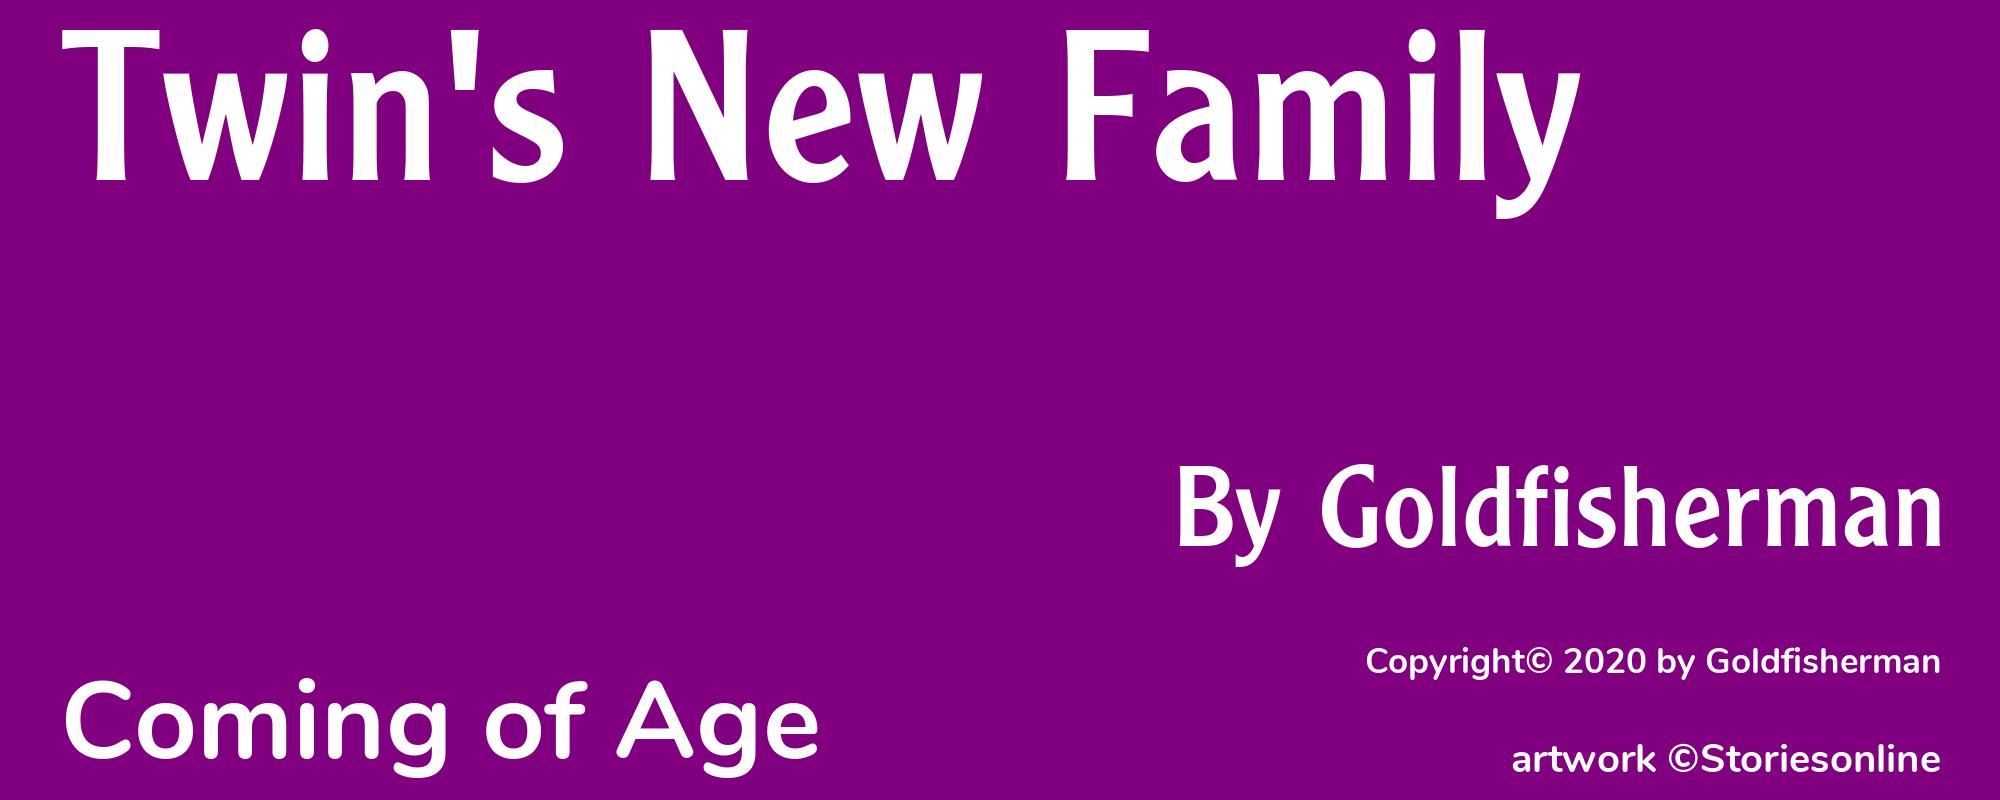 Twin's New Family - Cover